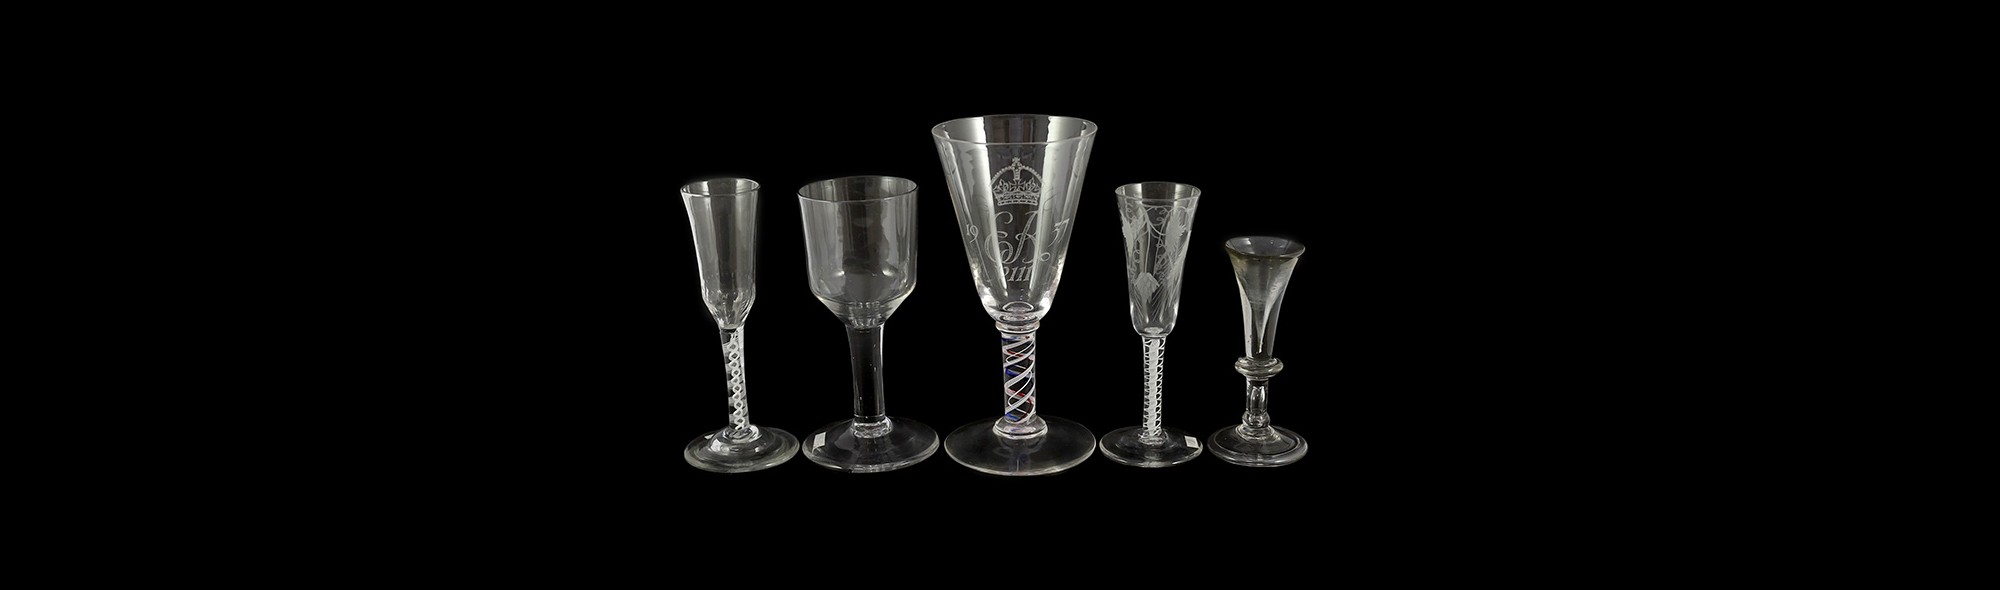 Antique Drinking Glasses